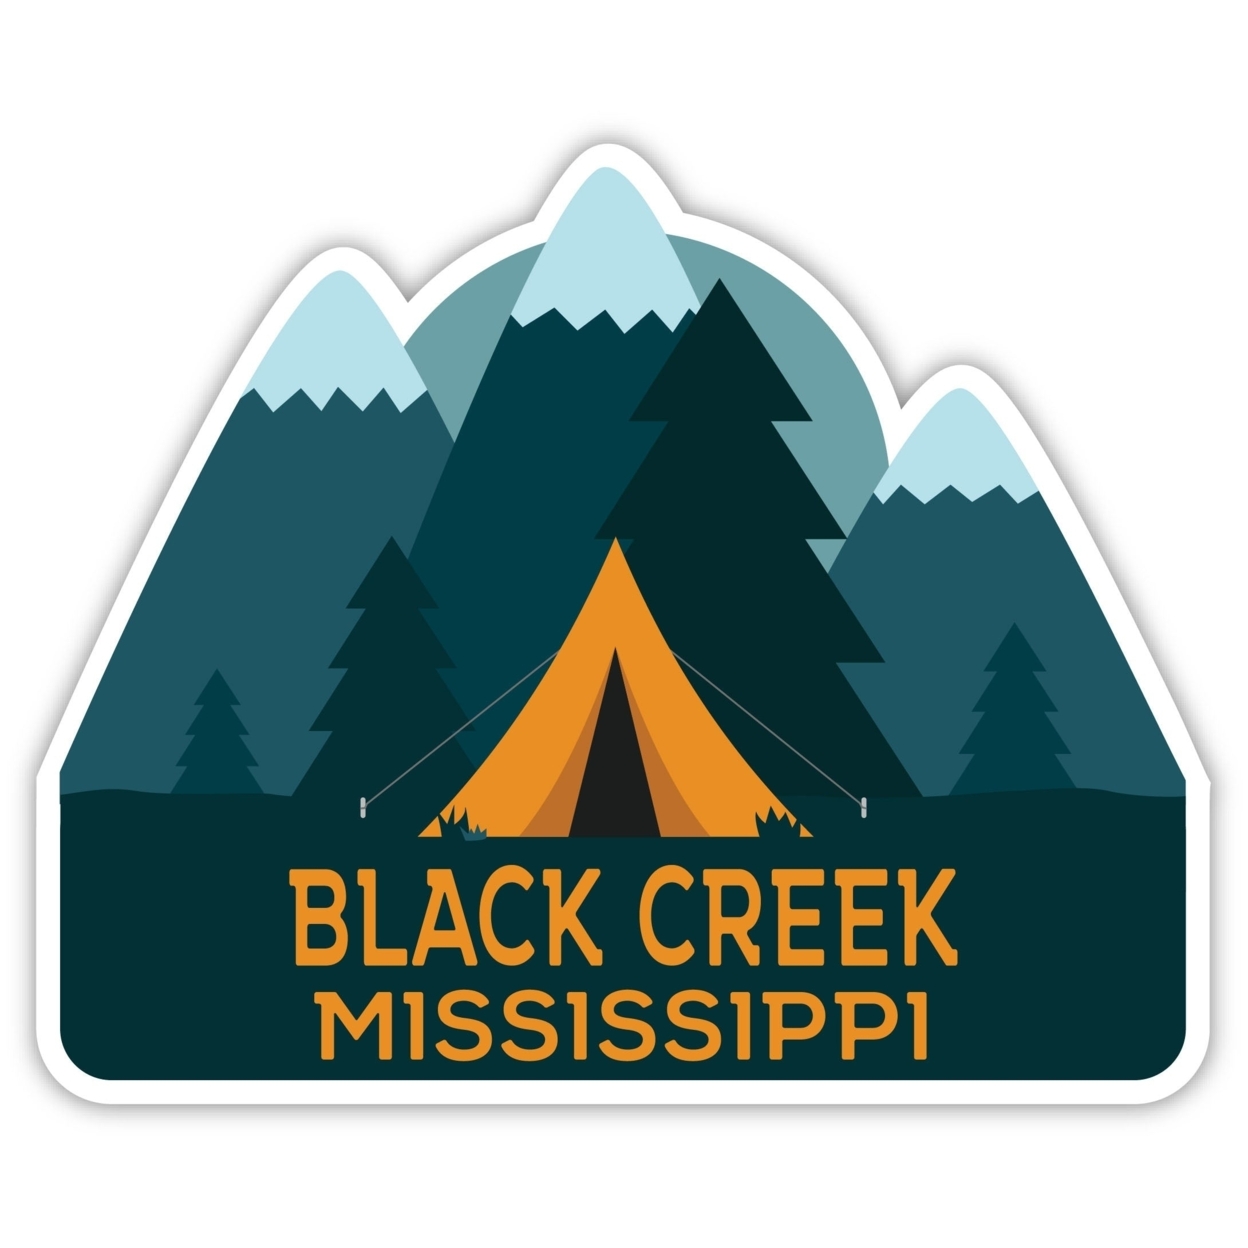 Black Creek Mississippi Souvenir Decorative Stickers (Choose Theme And Size) - 4-Pack, 8-Inch, Tent